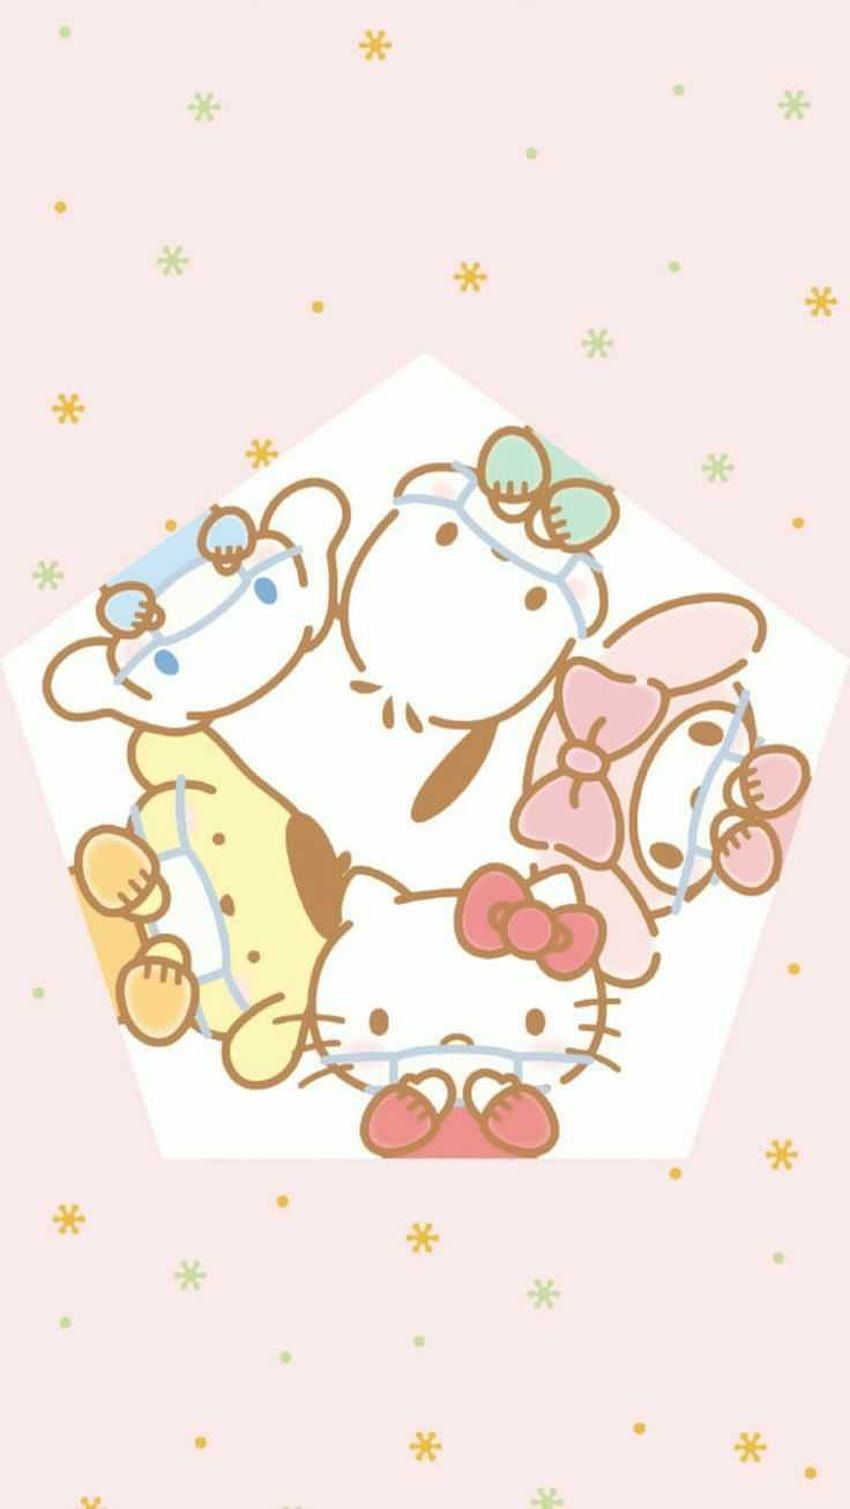 IPhone wallpaper with Hello Kitty and friends - Sanrio